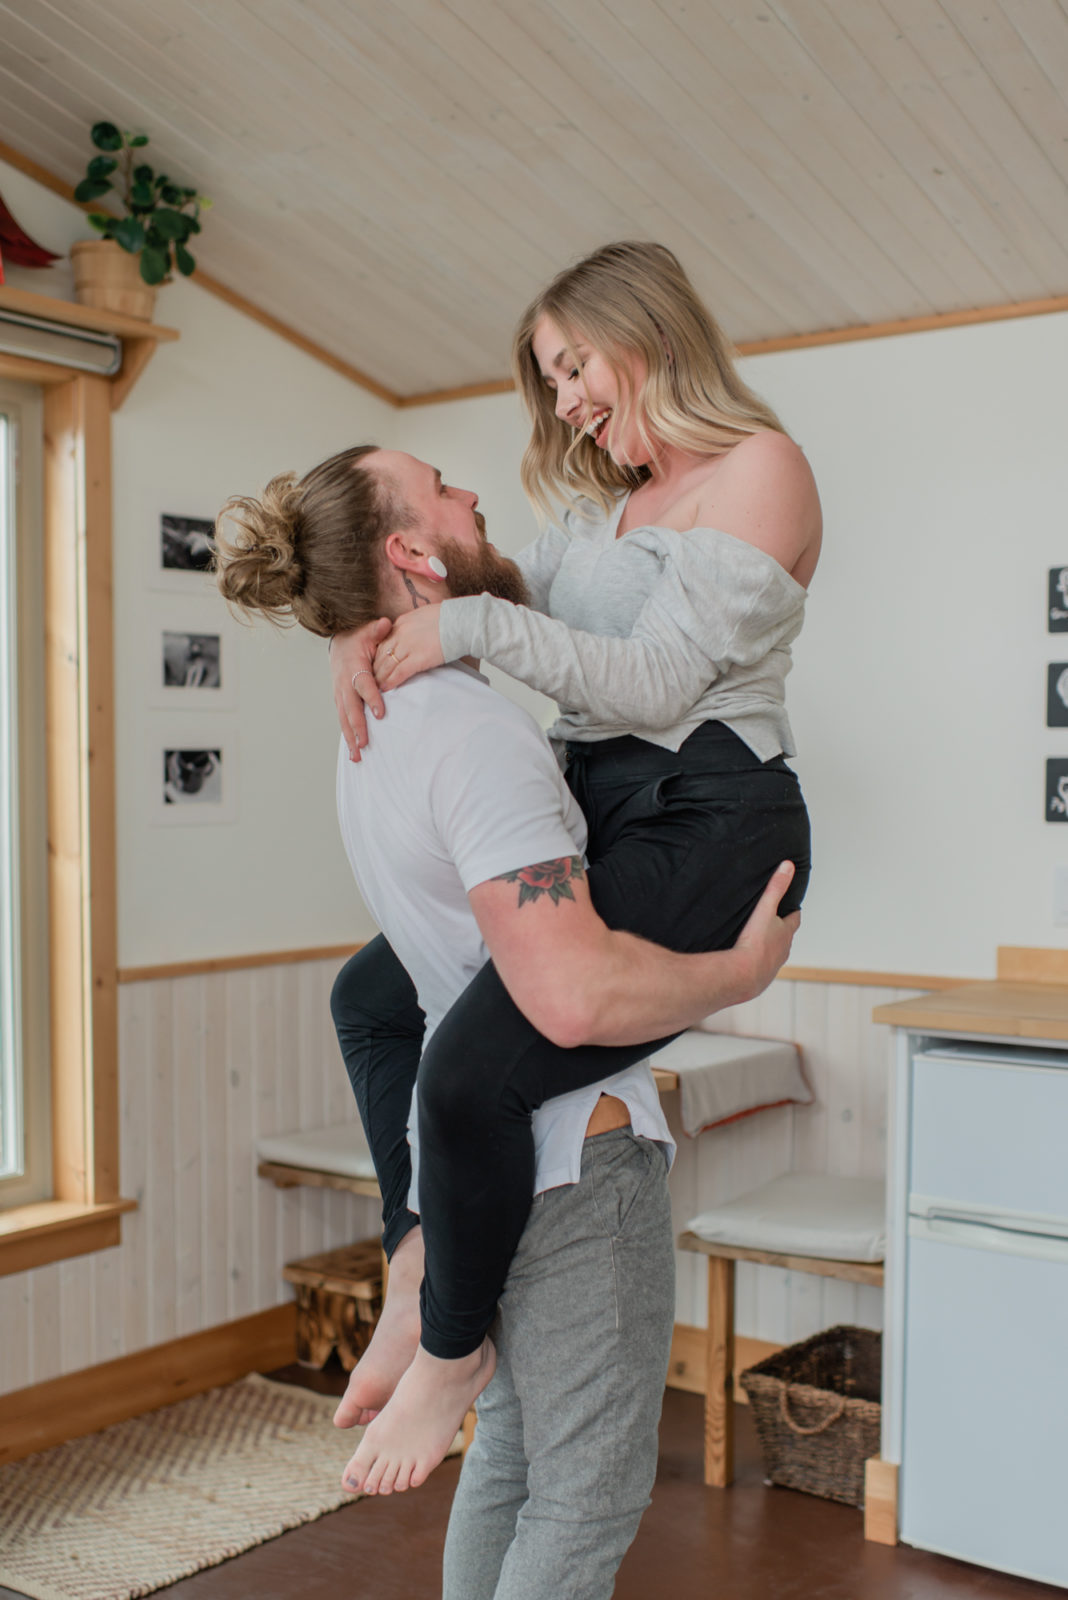 6 Tips All About Choosing Outfits For Your Engagement Session - Pro Tip from Kaity Body